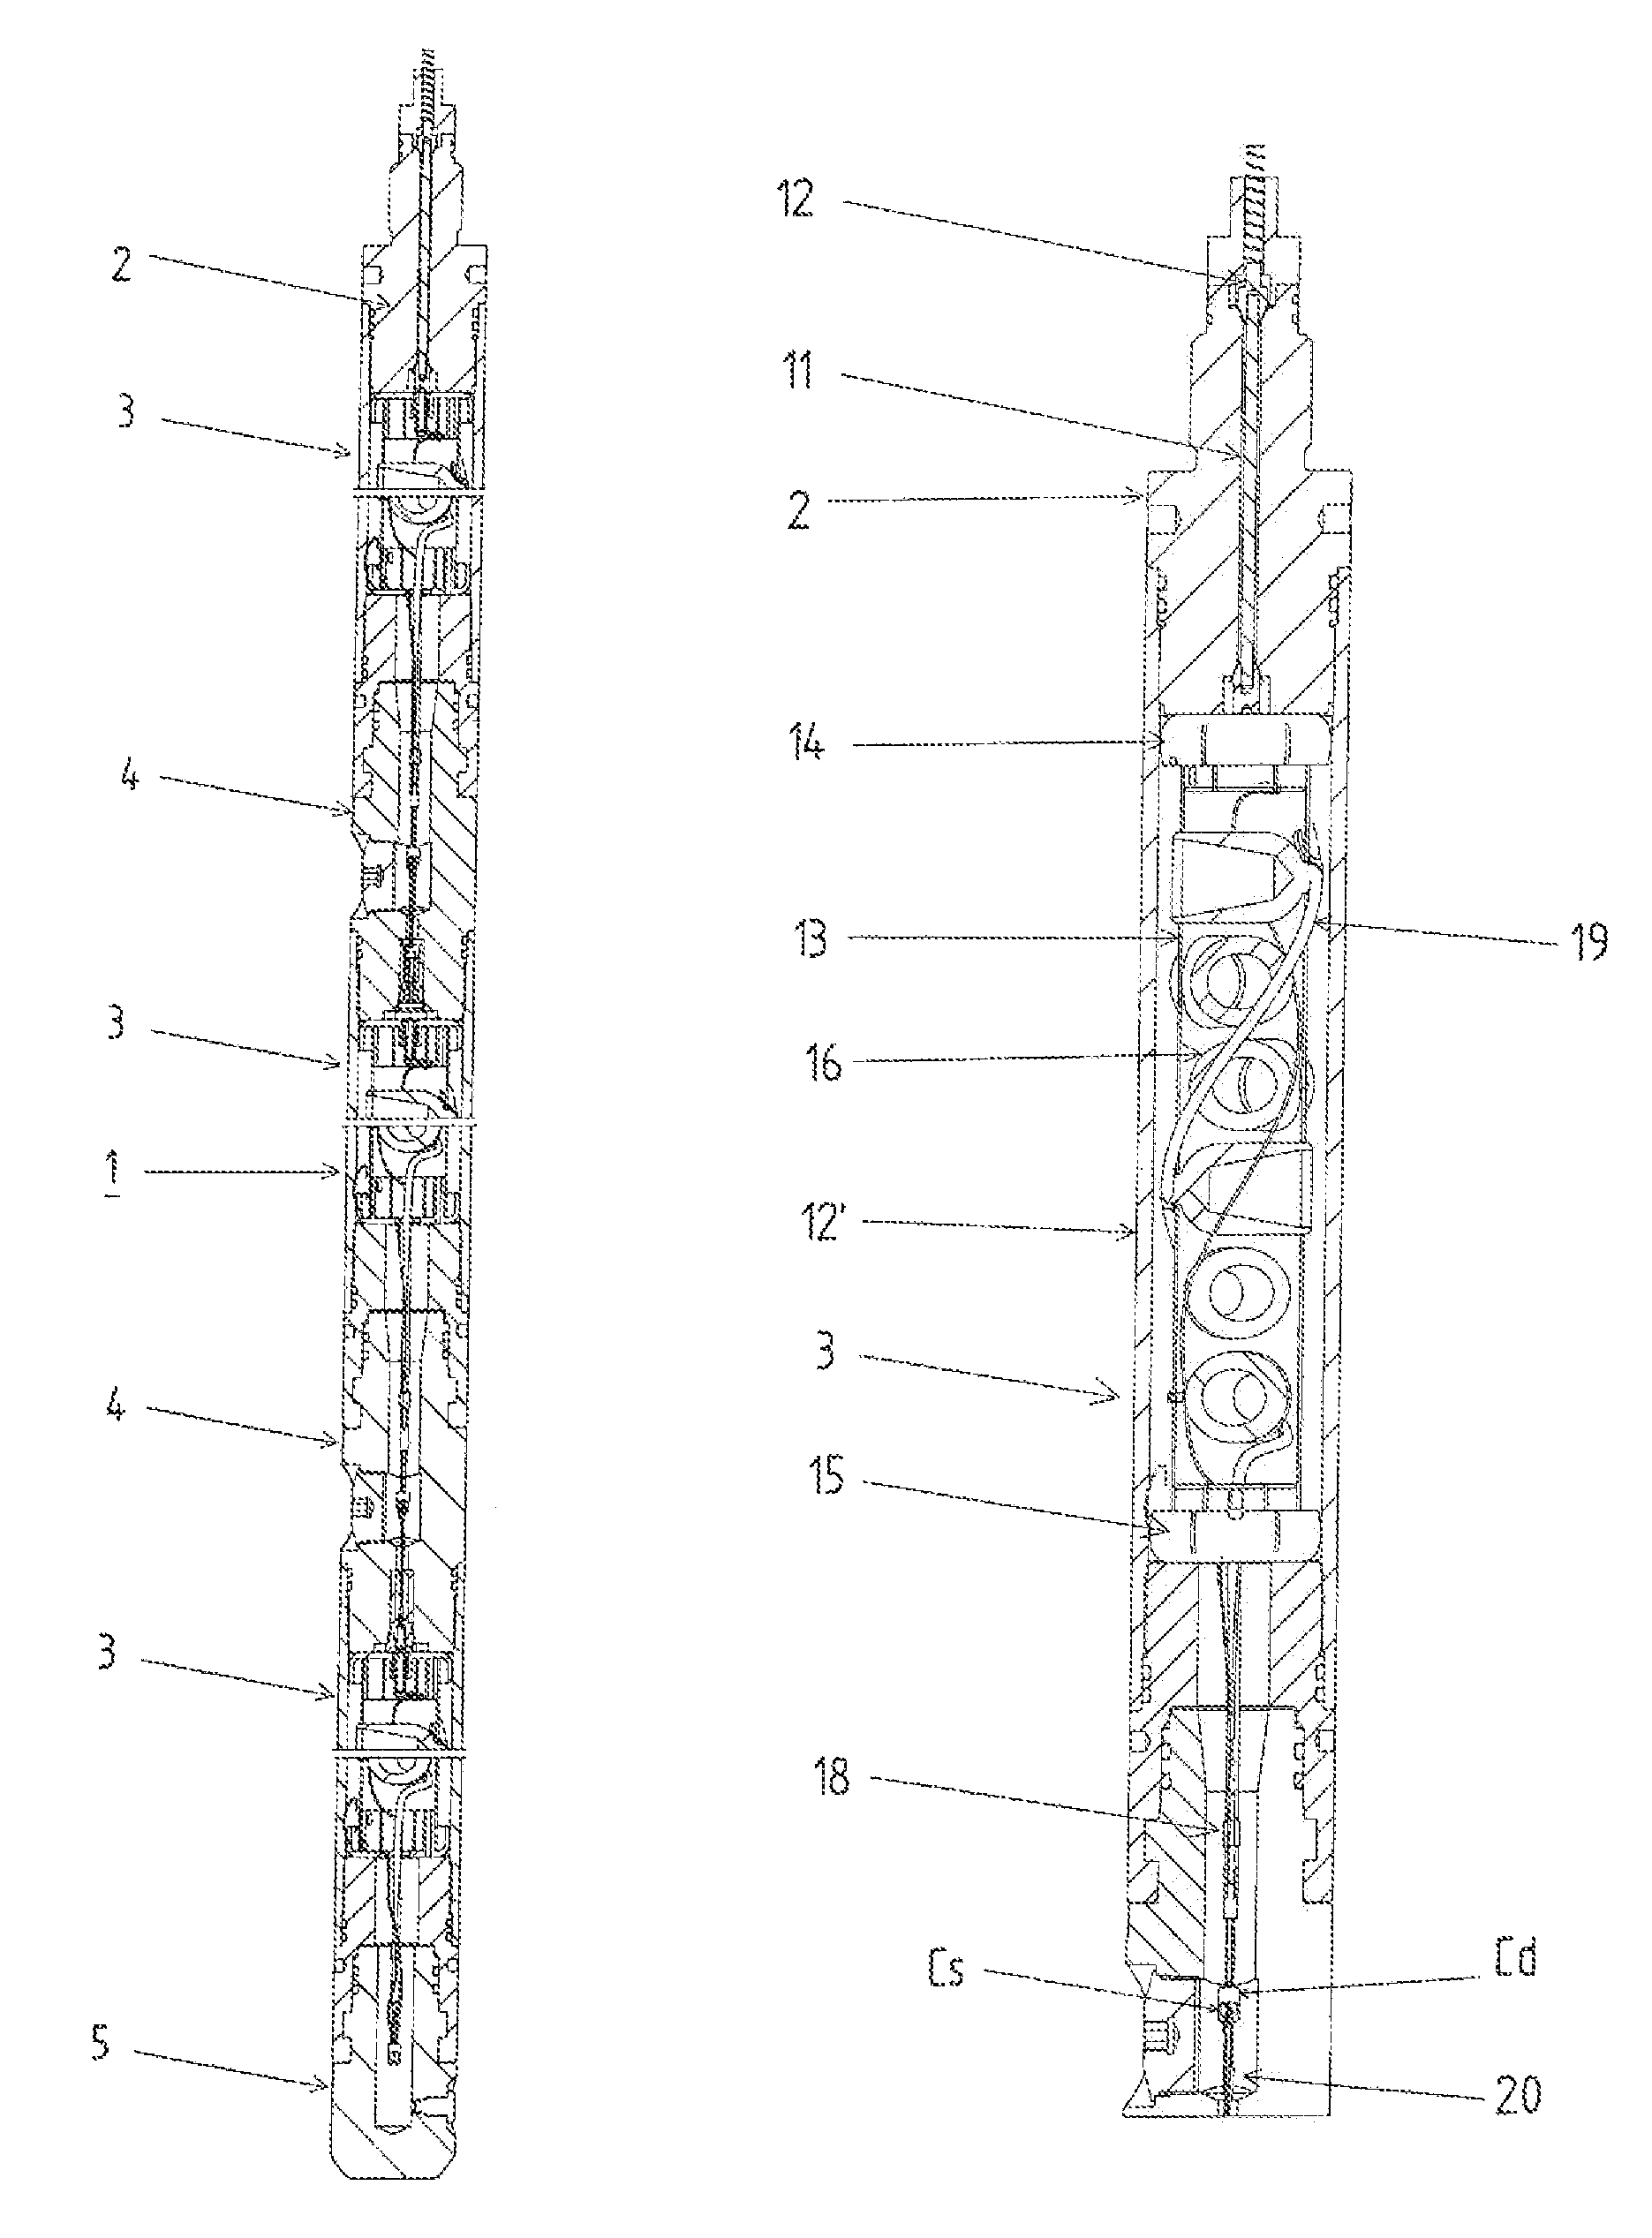 Electromechanical assembly for connecting a series of guns used in the perforation of wells